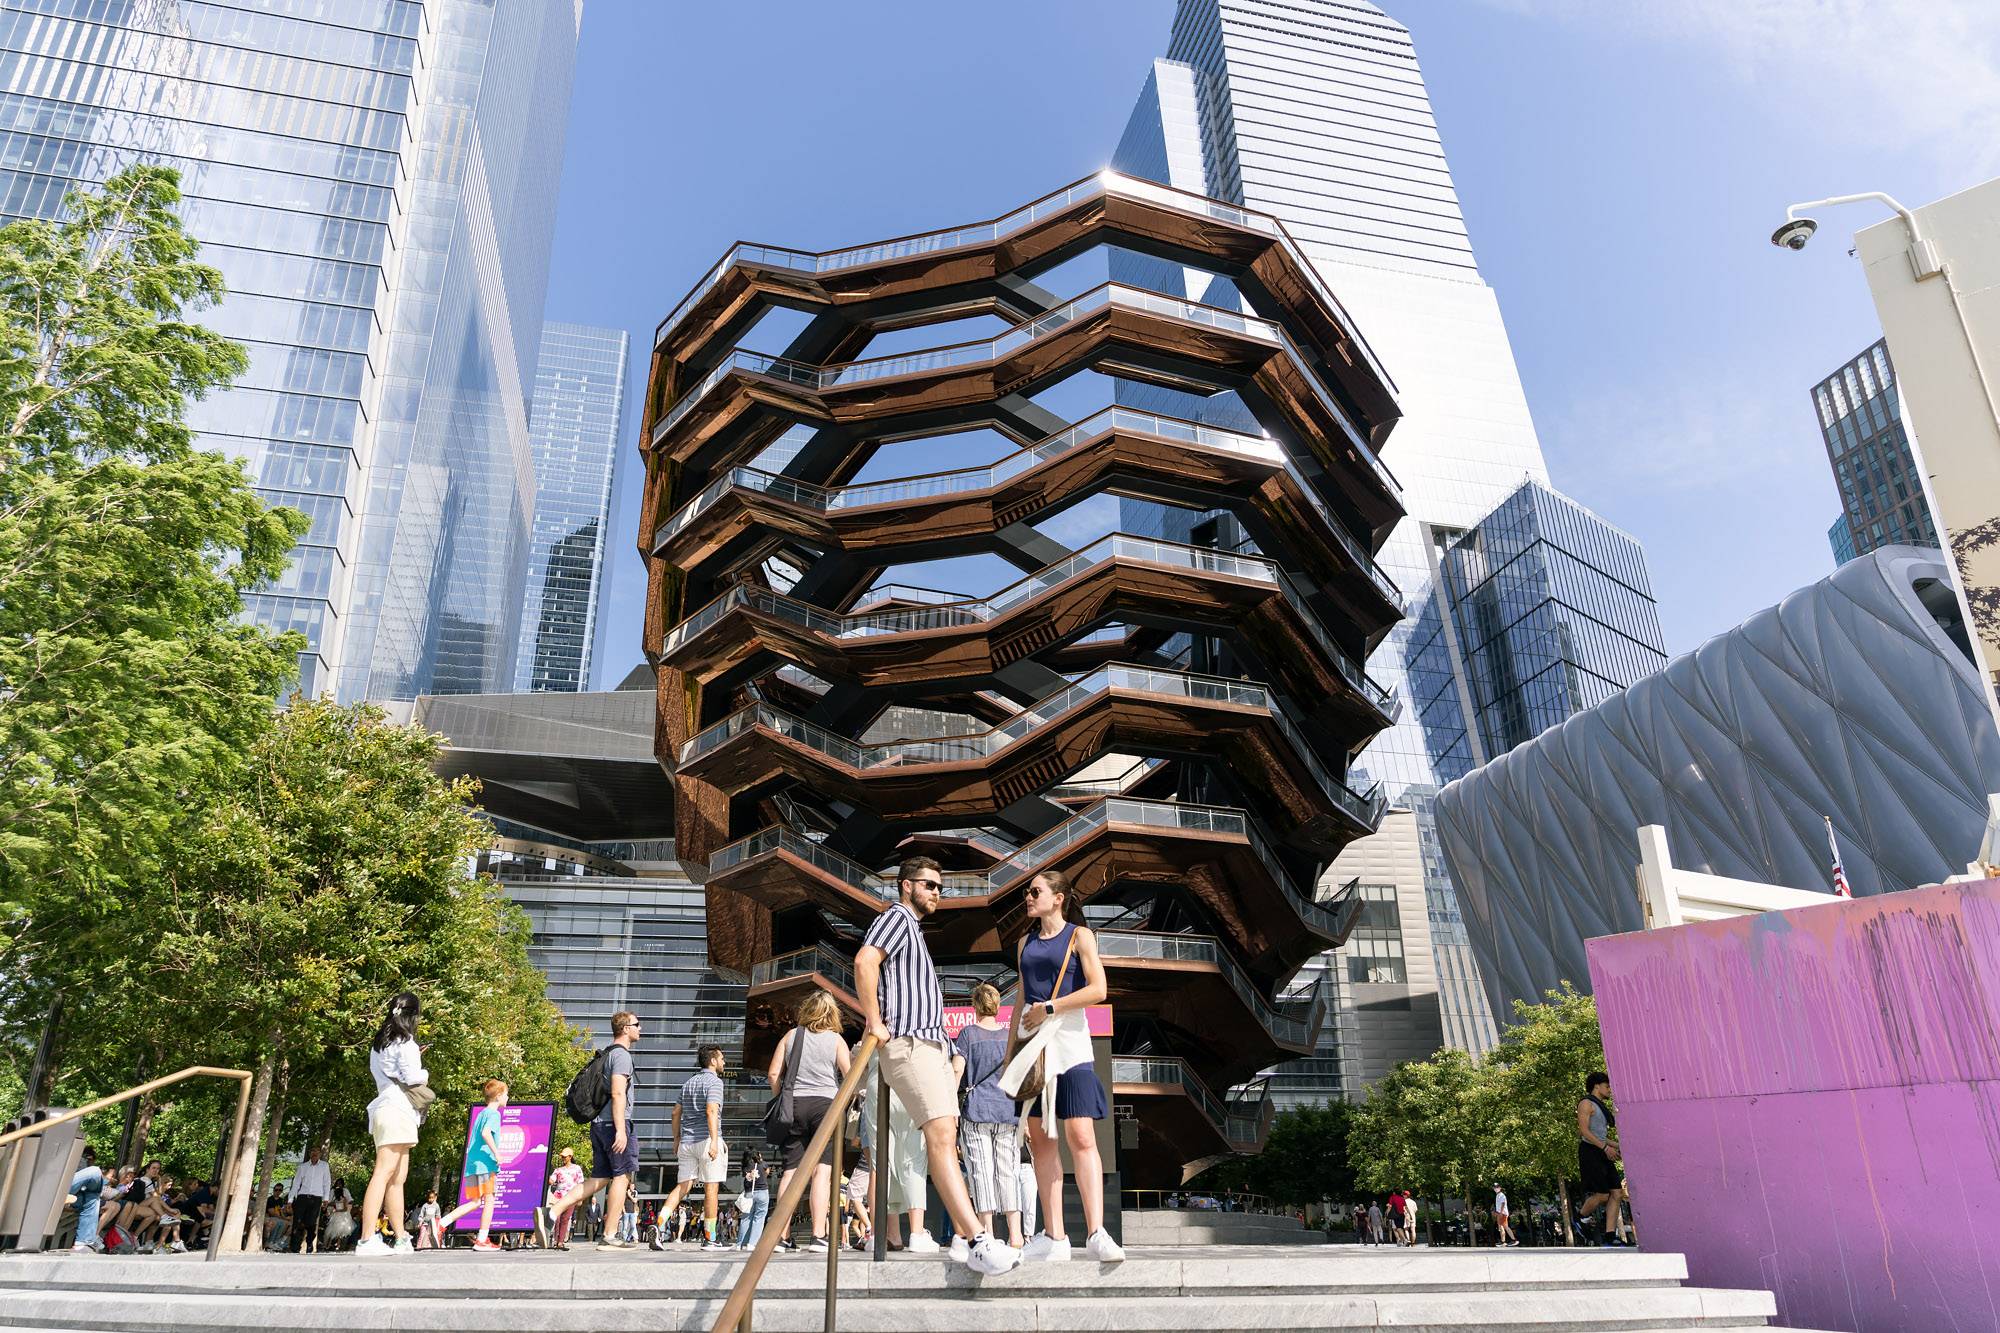 From the Vessel to New York City’s High Line
